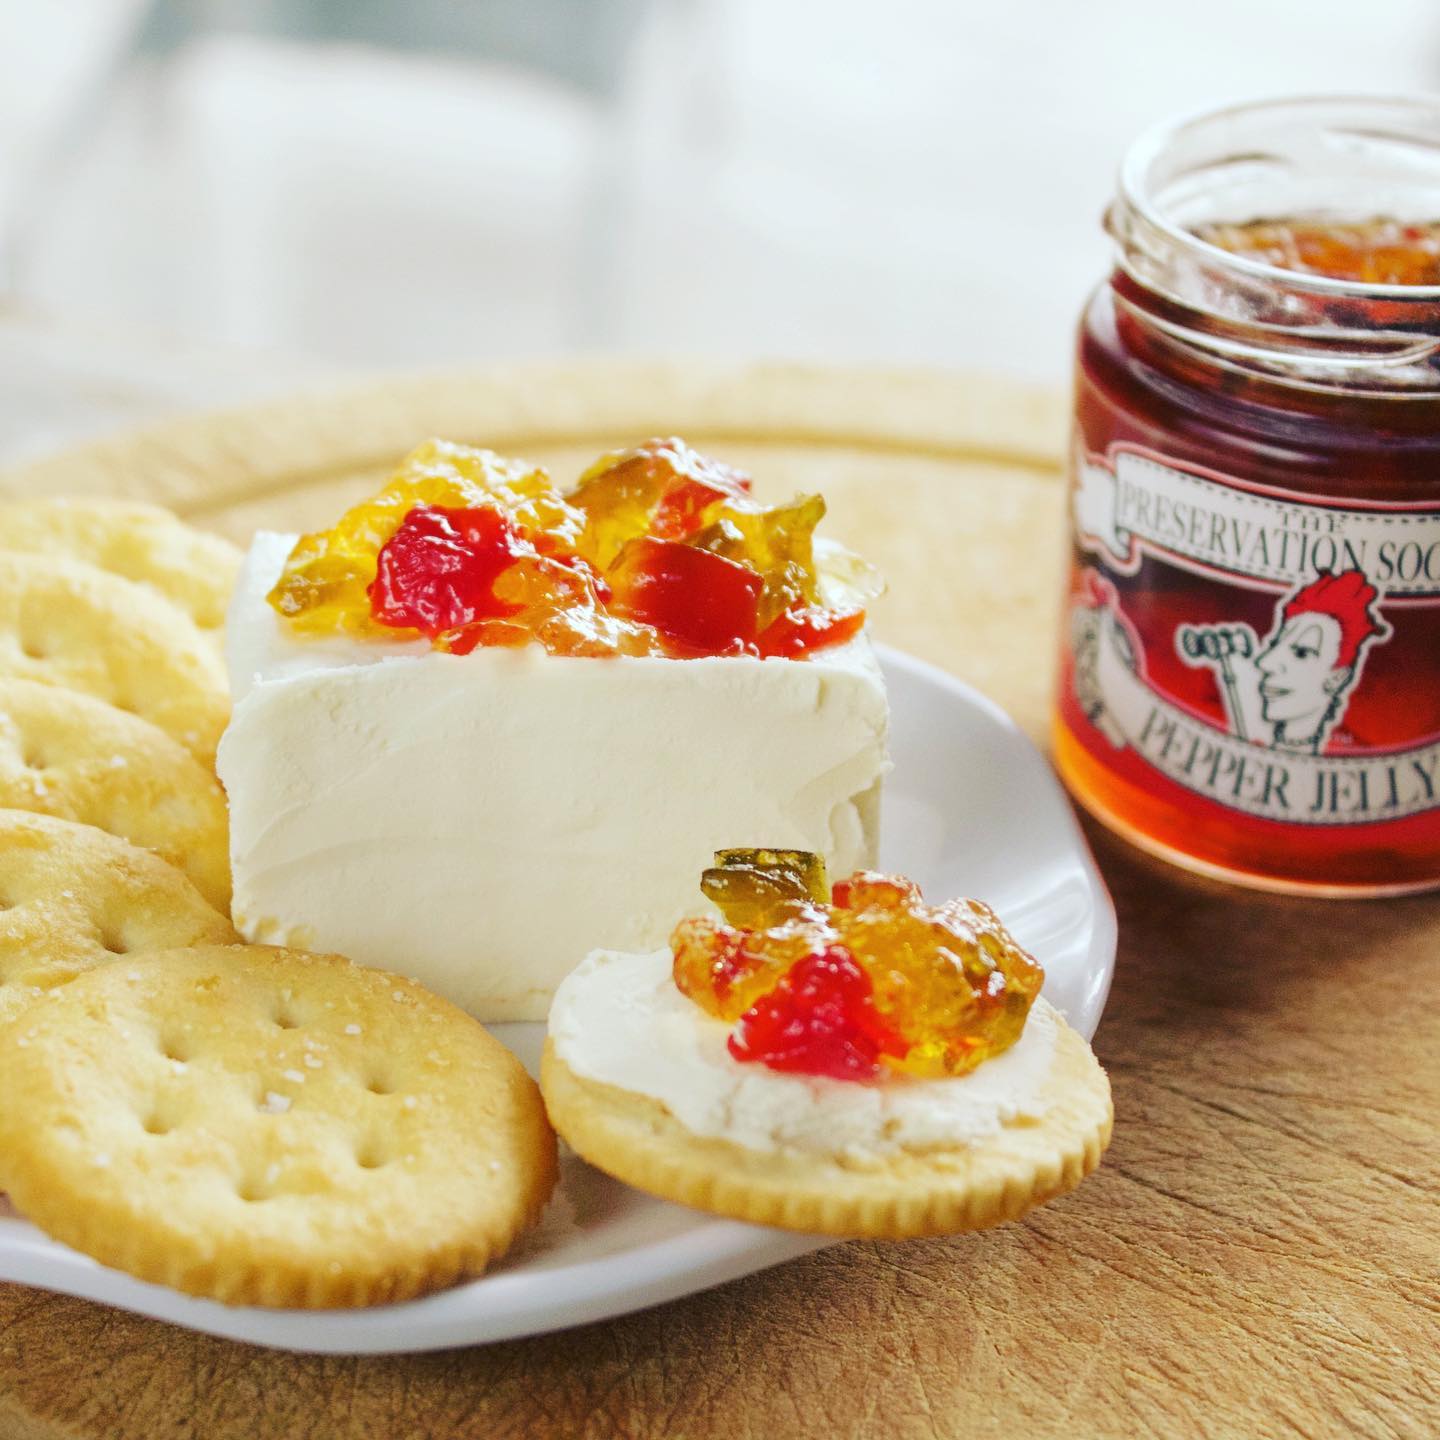 Hot Pepper Jelly - Dusty's Country Store